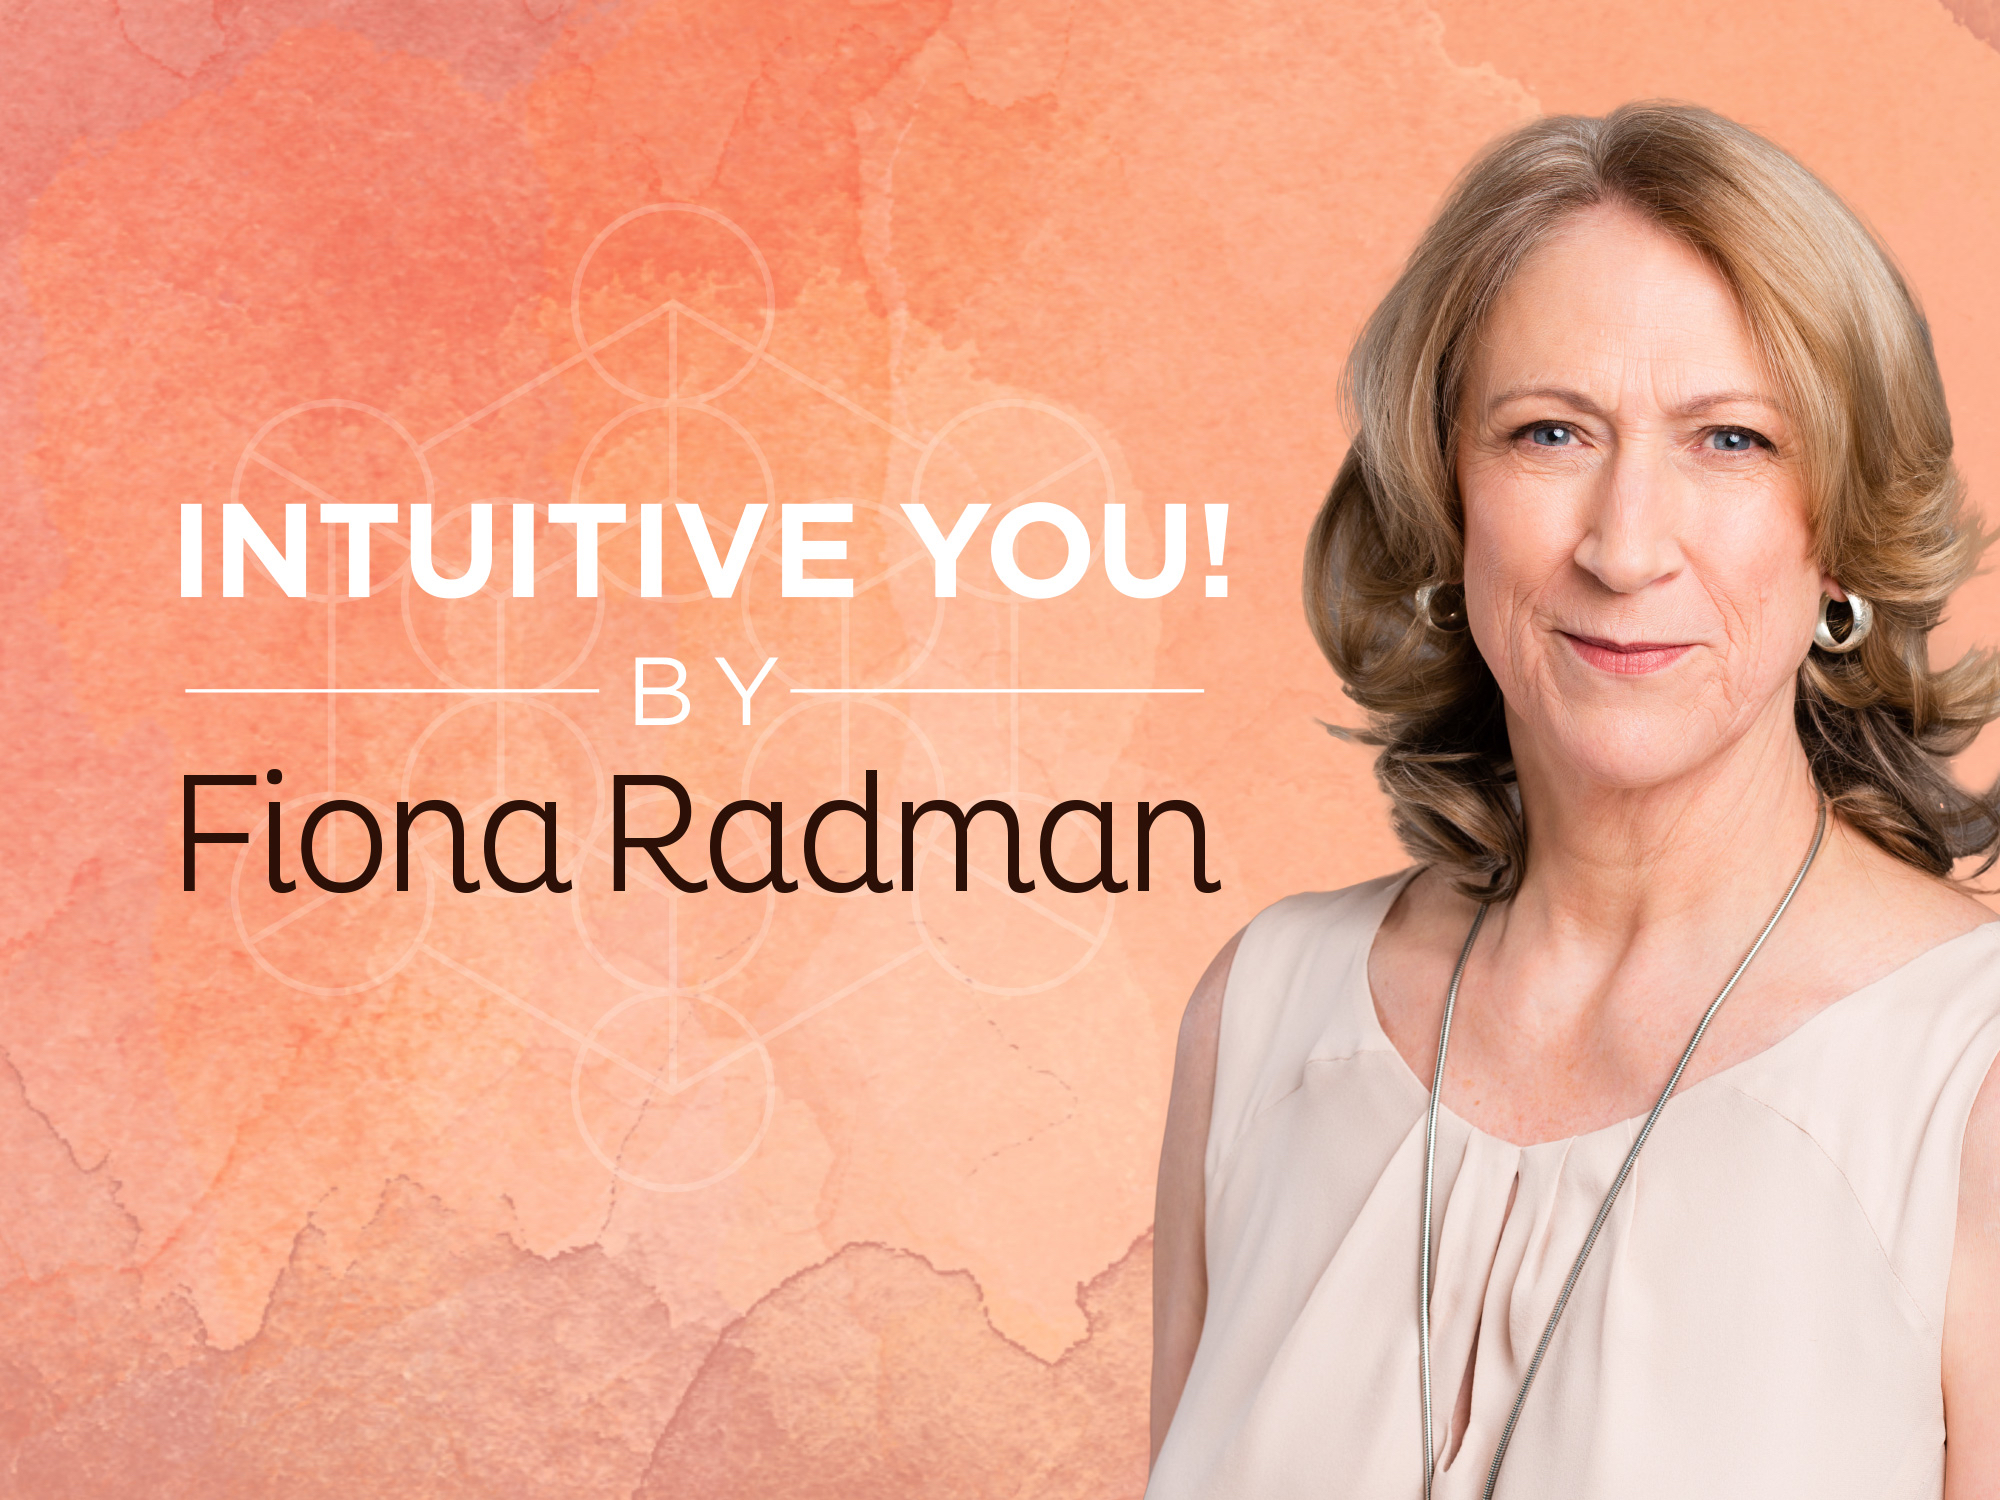 NEW – Fiona Radman’s INTUITIVE YOU!